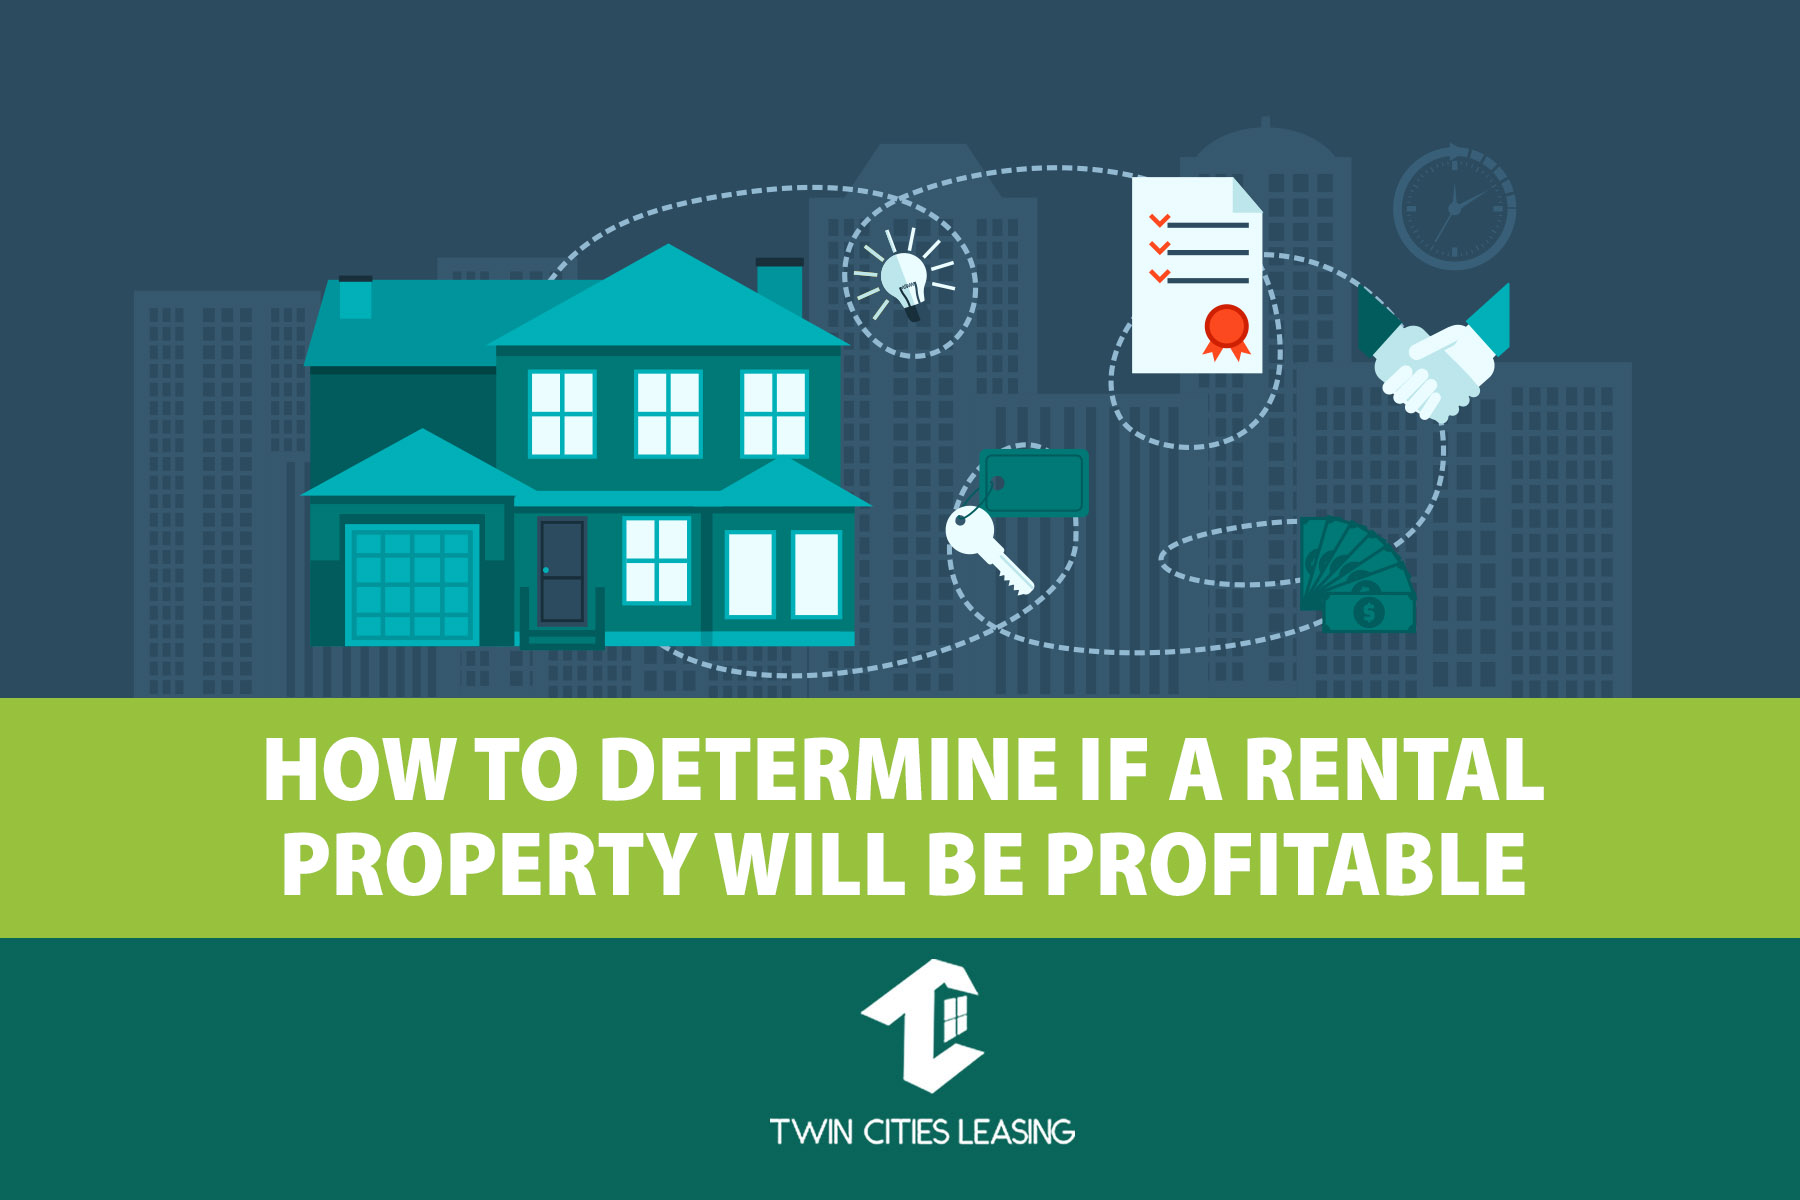 How to Determine If a Rental Property Will be Profitable